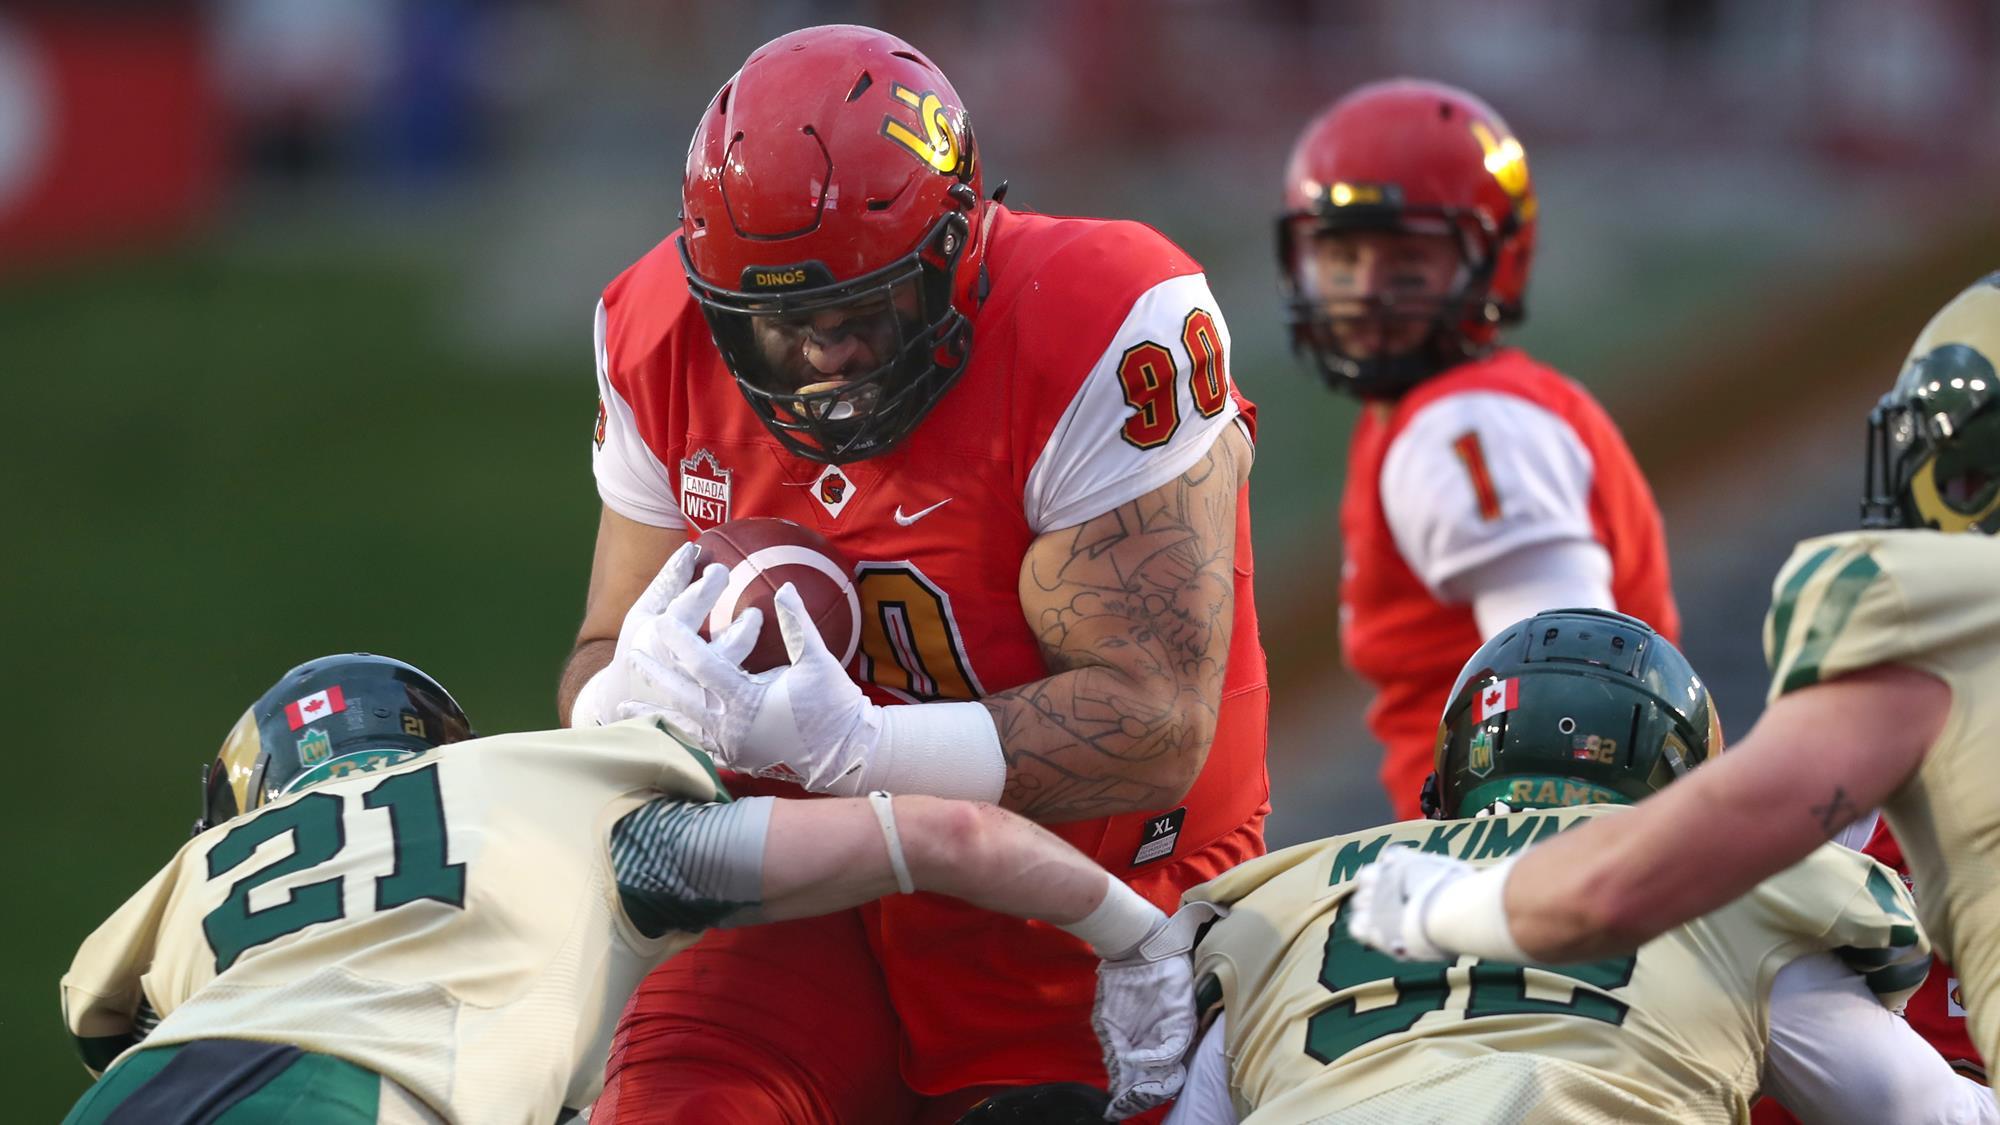 J-Min Pelley spent the 2019 season with the Calgary Dinos, helping the team to a Vanier Cup. Photo Courtesy: Dinos Athletics.